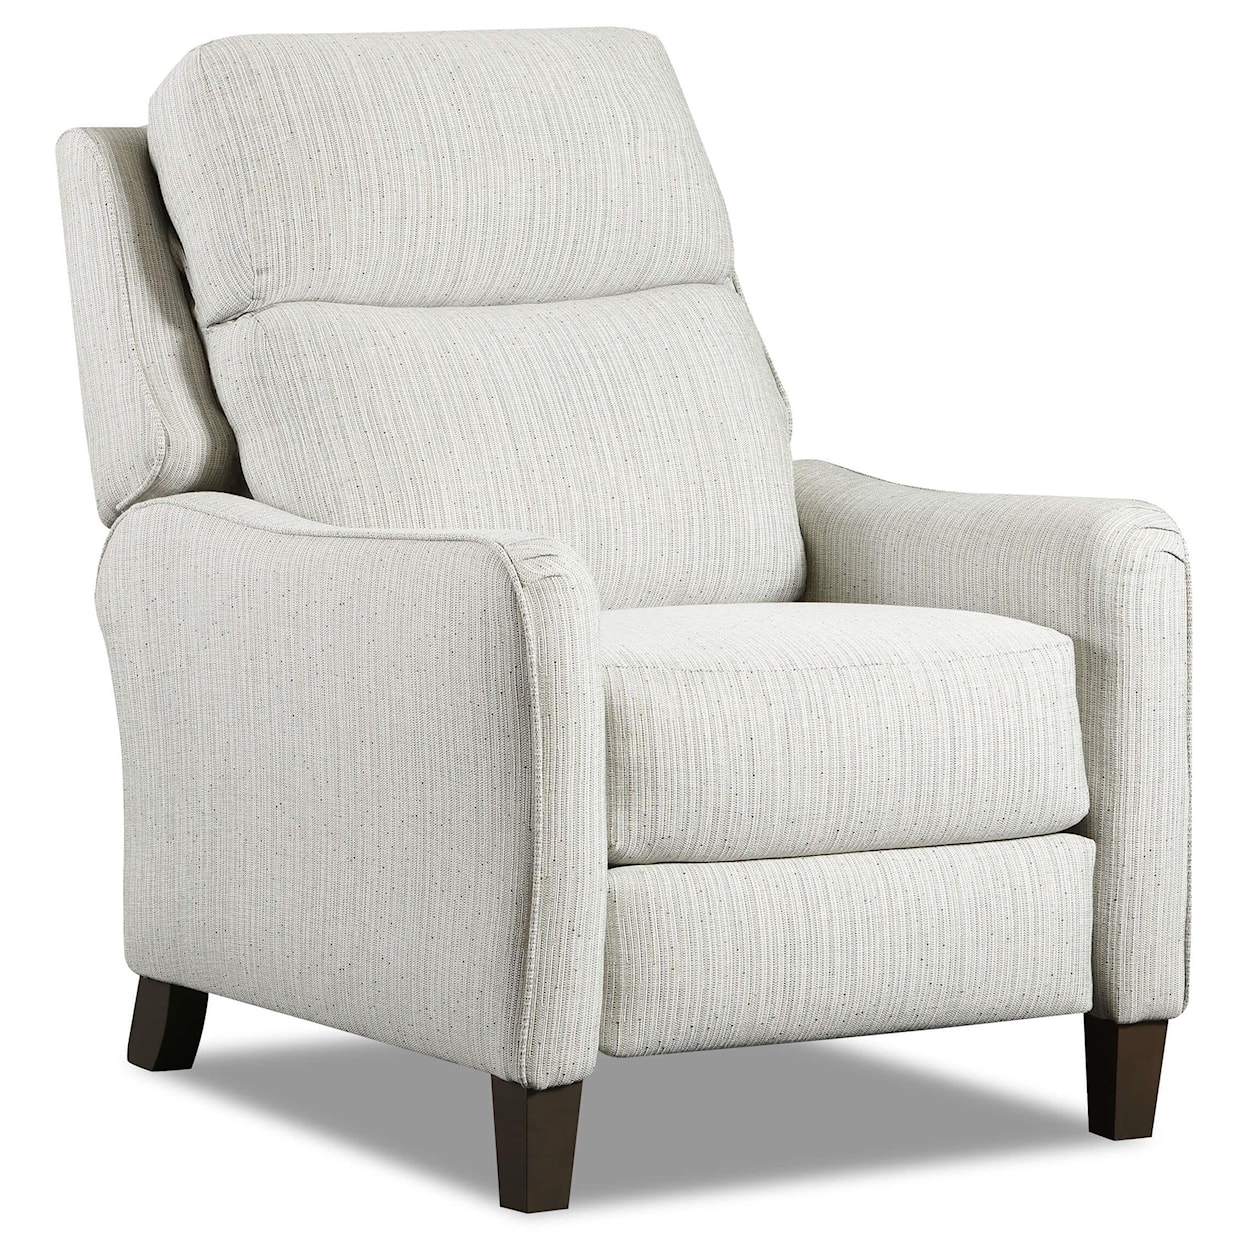 Southern Motion Wild Card Legend Recliner